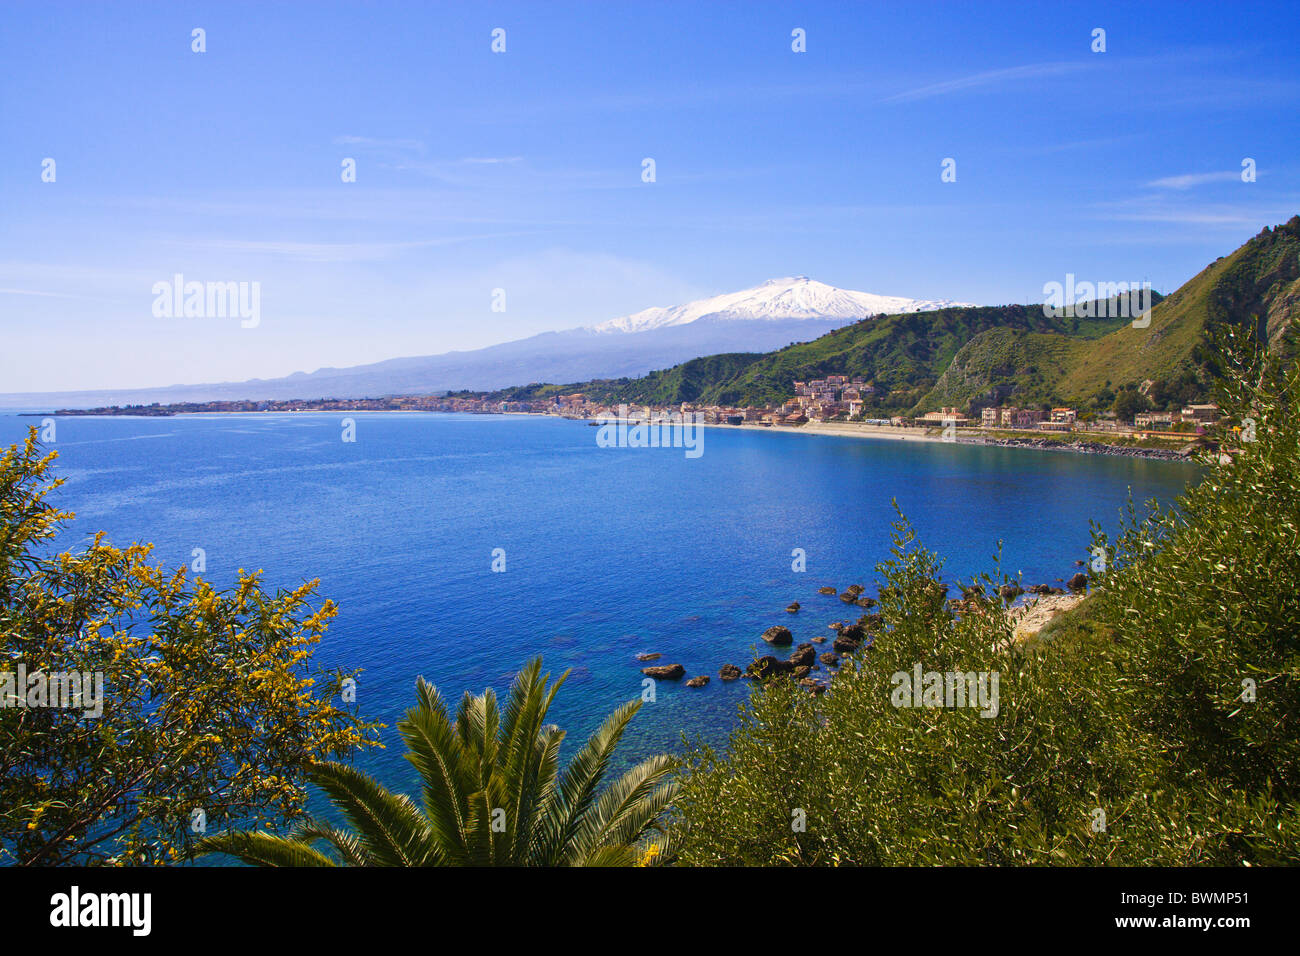 Etna Volcano in Sicily, Italy seen from Taormina. Blue sea on foreground. Stock Photo